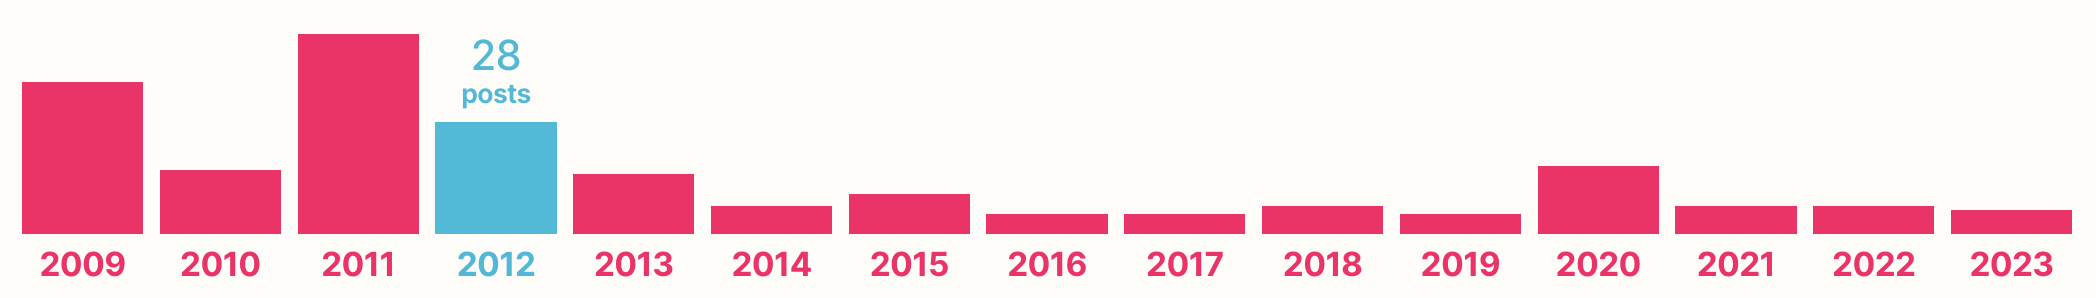 Bar chart of posts by year, with 2012 selected and text above it reading "28 posts"